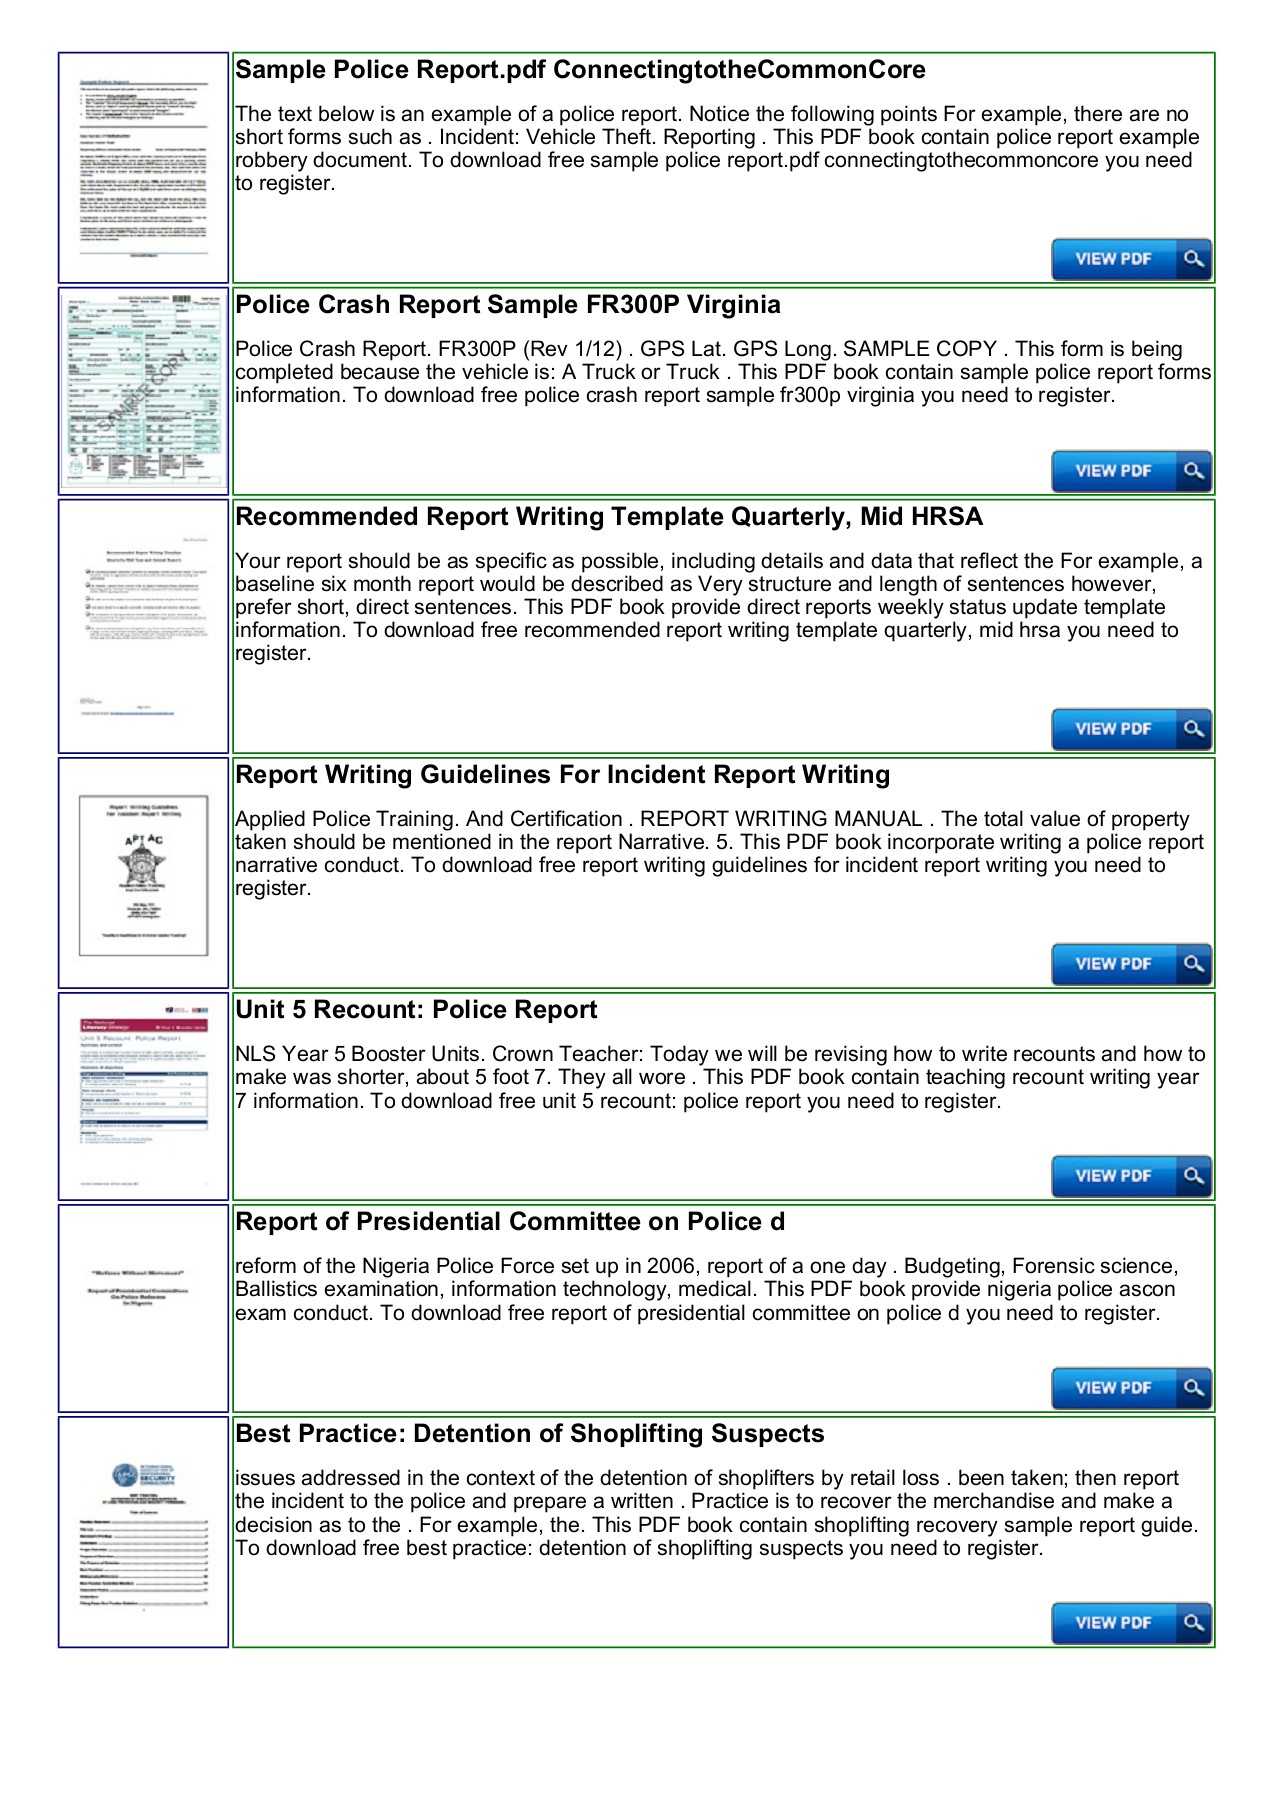 Police Shoplifting Report Writing Template Sample Pages 1 Regarding Police Report Template Pdf